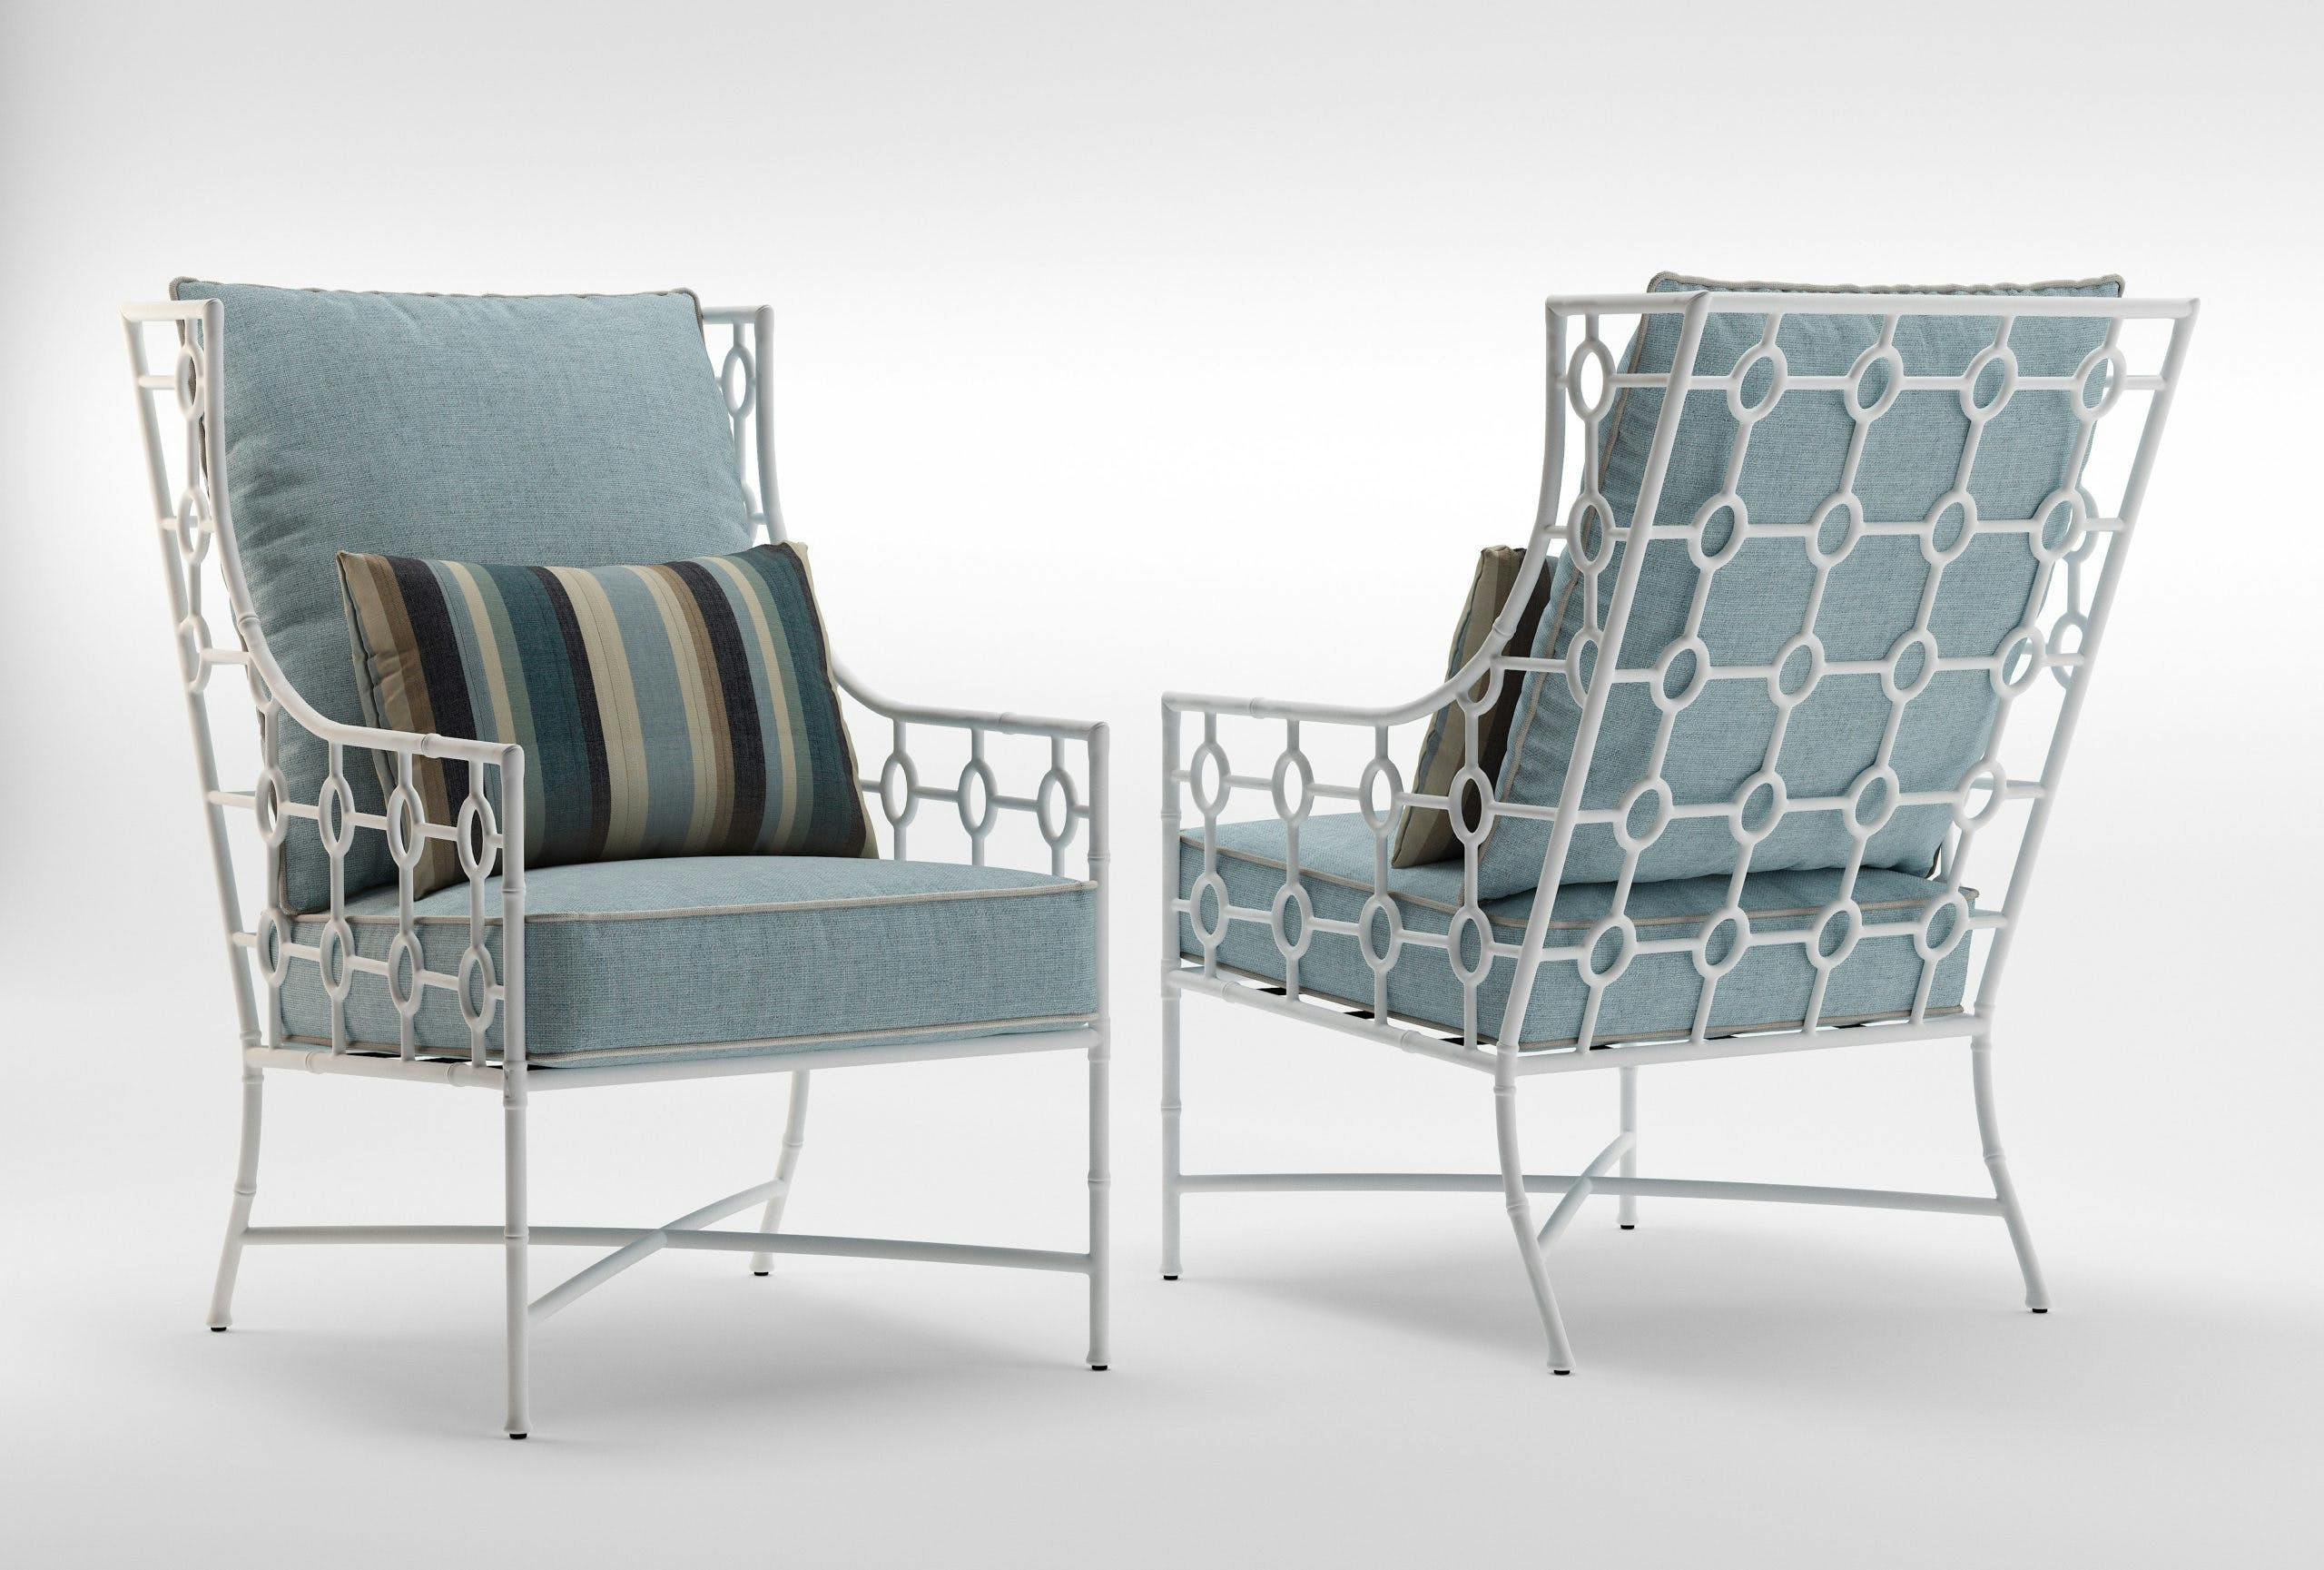 Savannah Collection by Barclay Butera Launch | Castelle Furniture